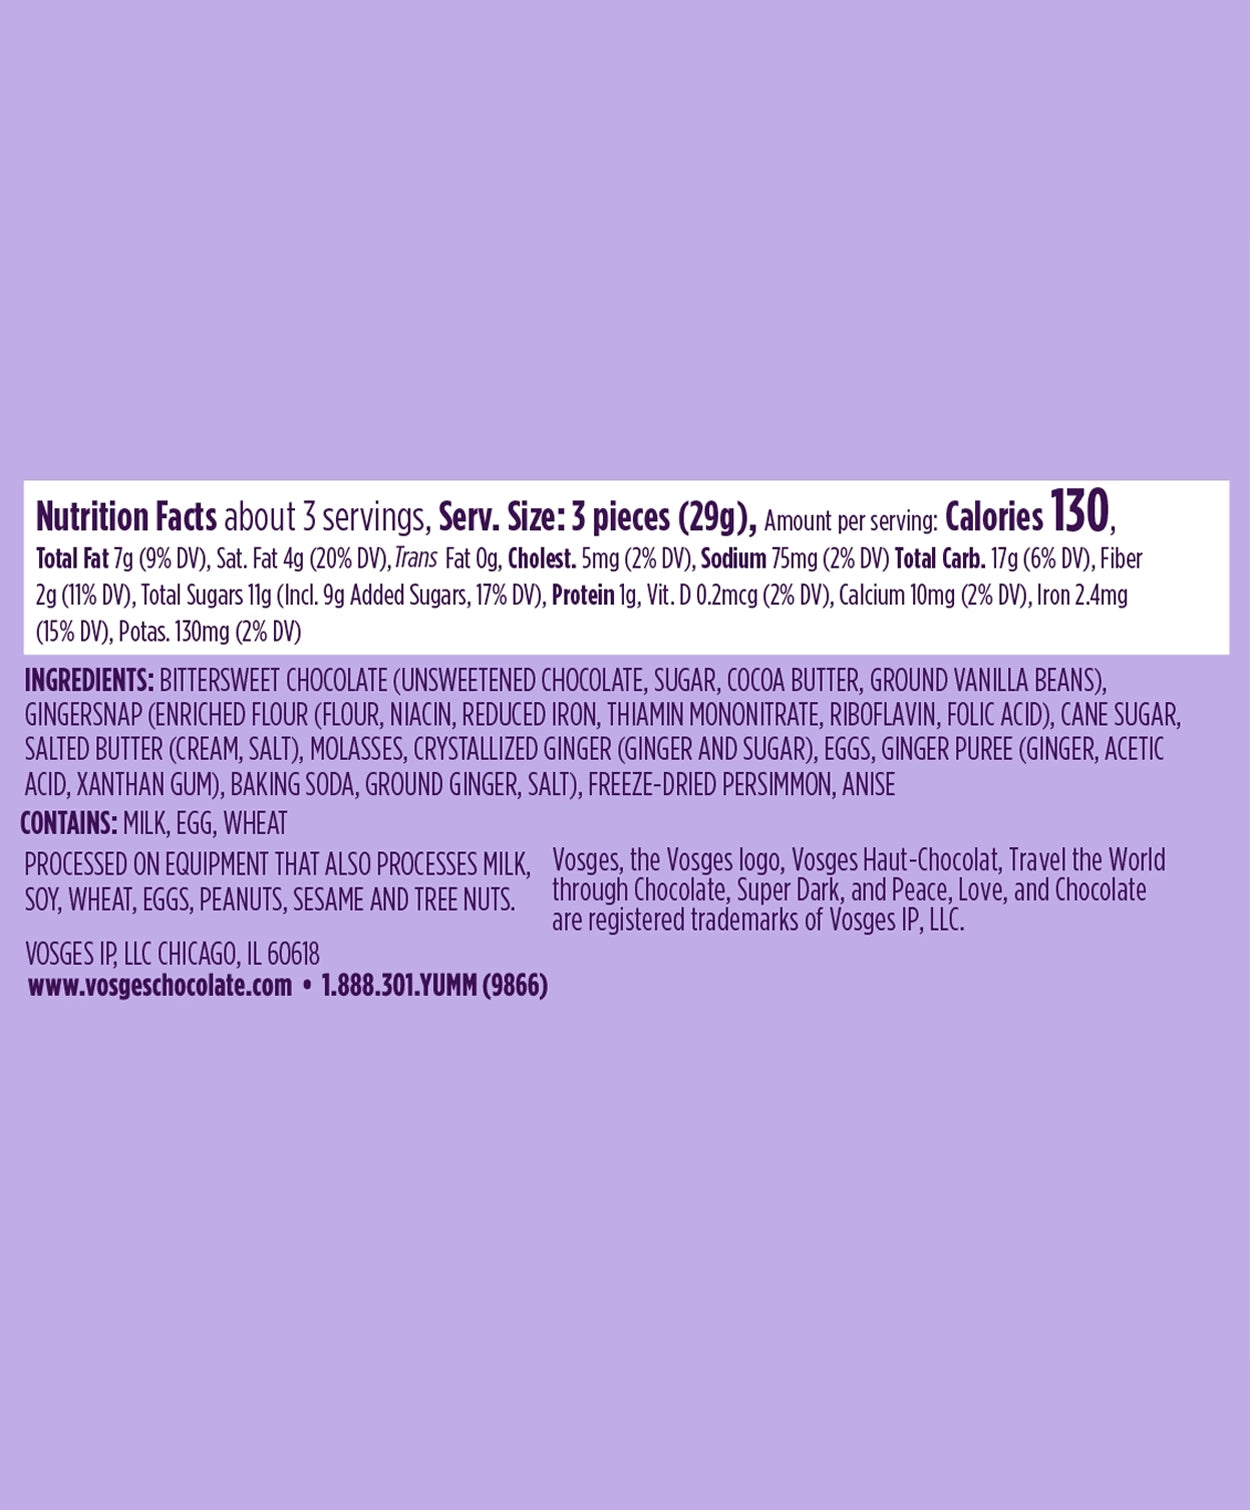 Nutrition Facts and Ingredients of Vosges Haut-Chocolat Chocolate Dipped Persimmon Cookies in purple, san-serif font on a light purple background.